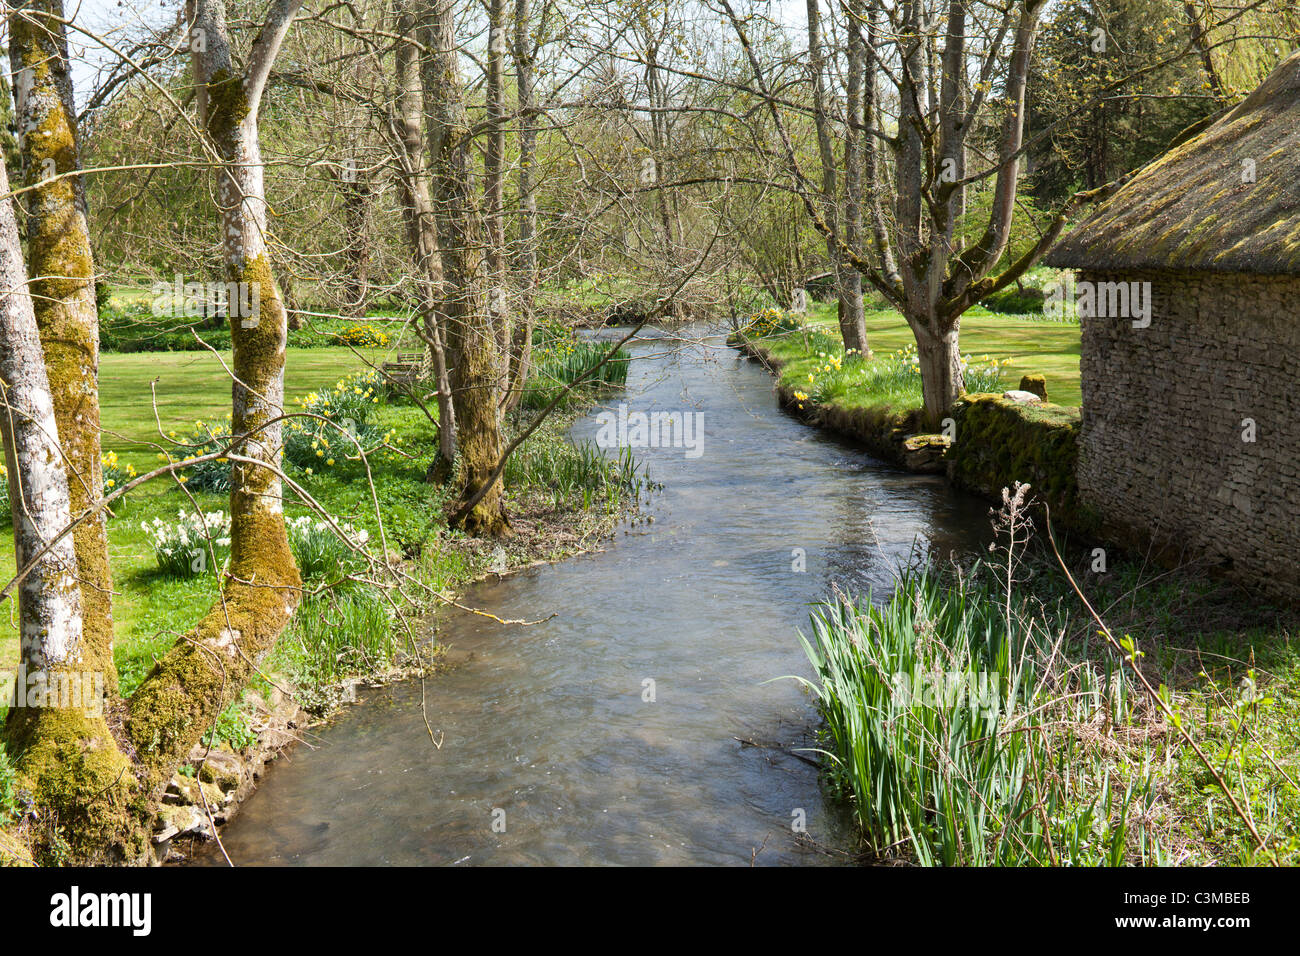 Springtime on the River Coln in the Cotswold village of Winson, Gloucestershire, England UK Stock Photo